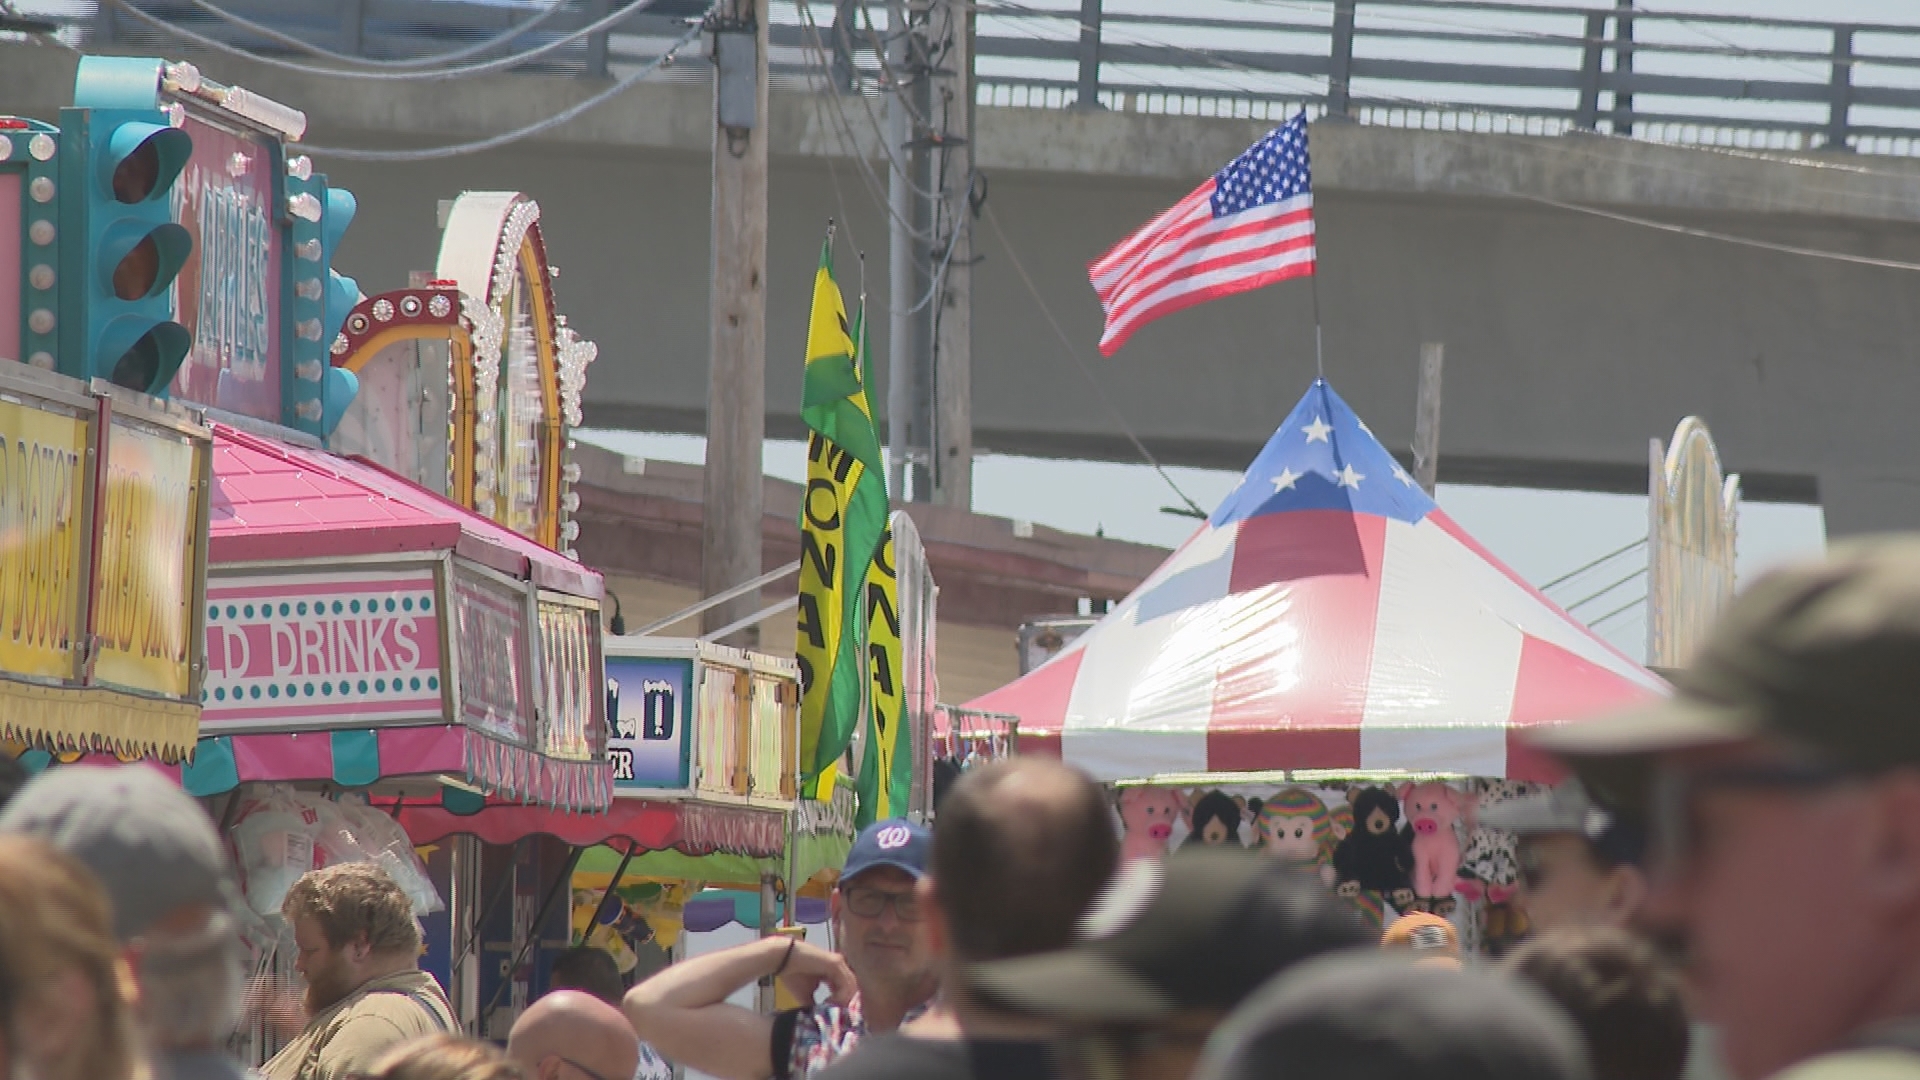 A joint celebration recognizing Independence Day and Bath's shipbuilding history, hundreds headed to the downtown area for the occasion.